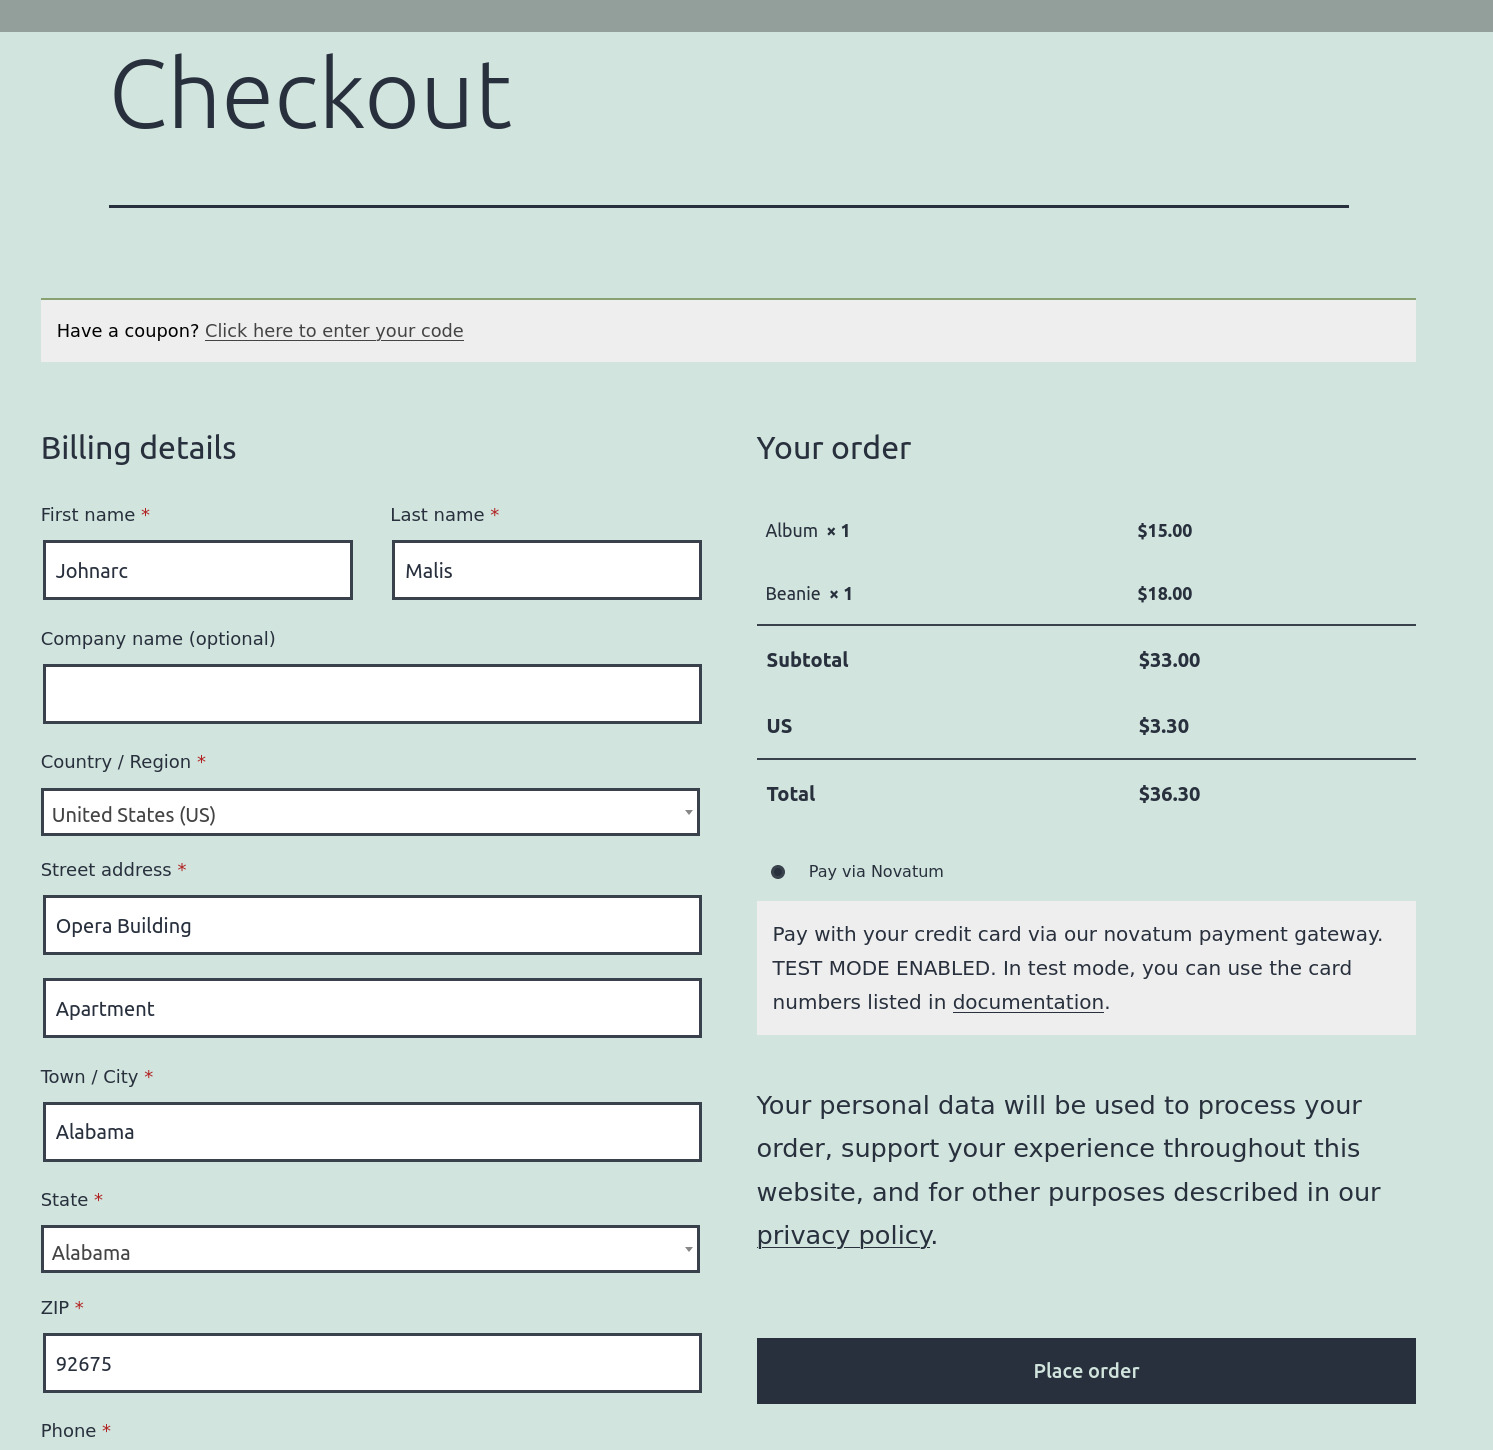 Normal checkout with Novatum.